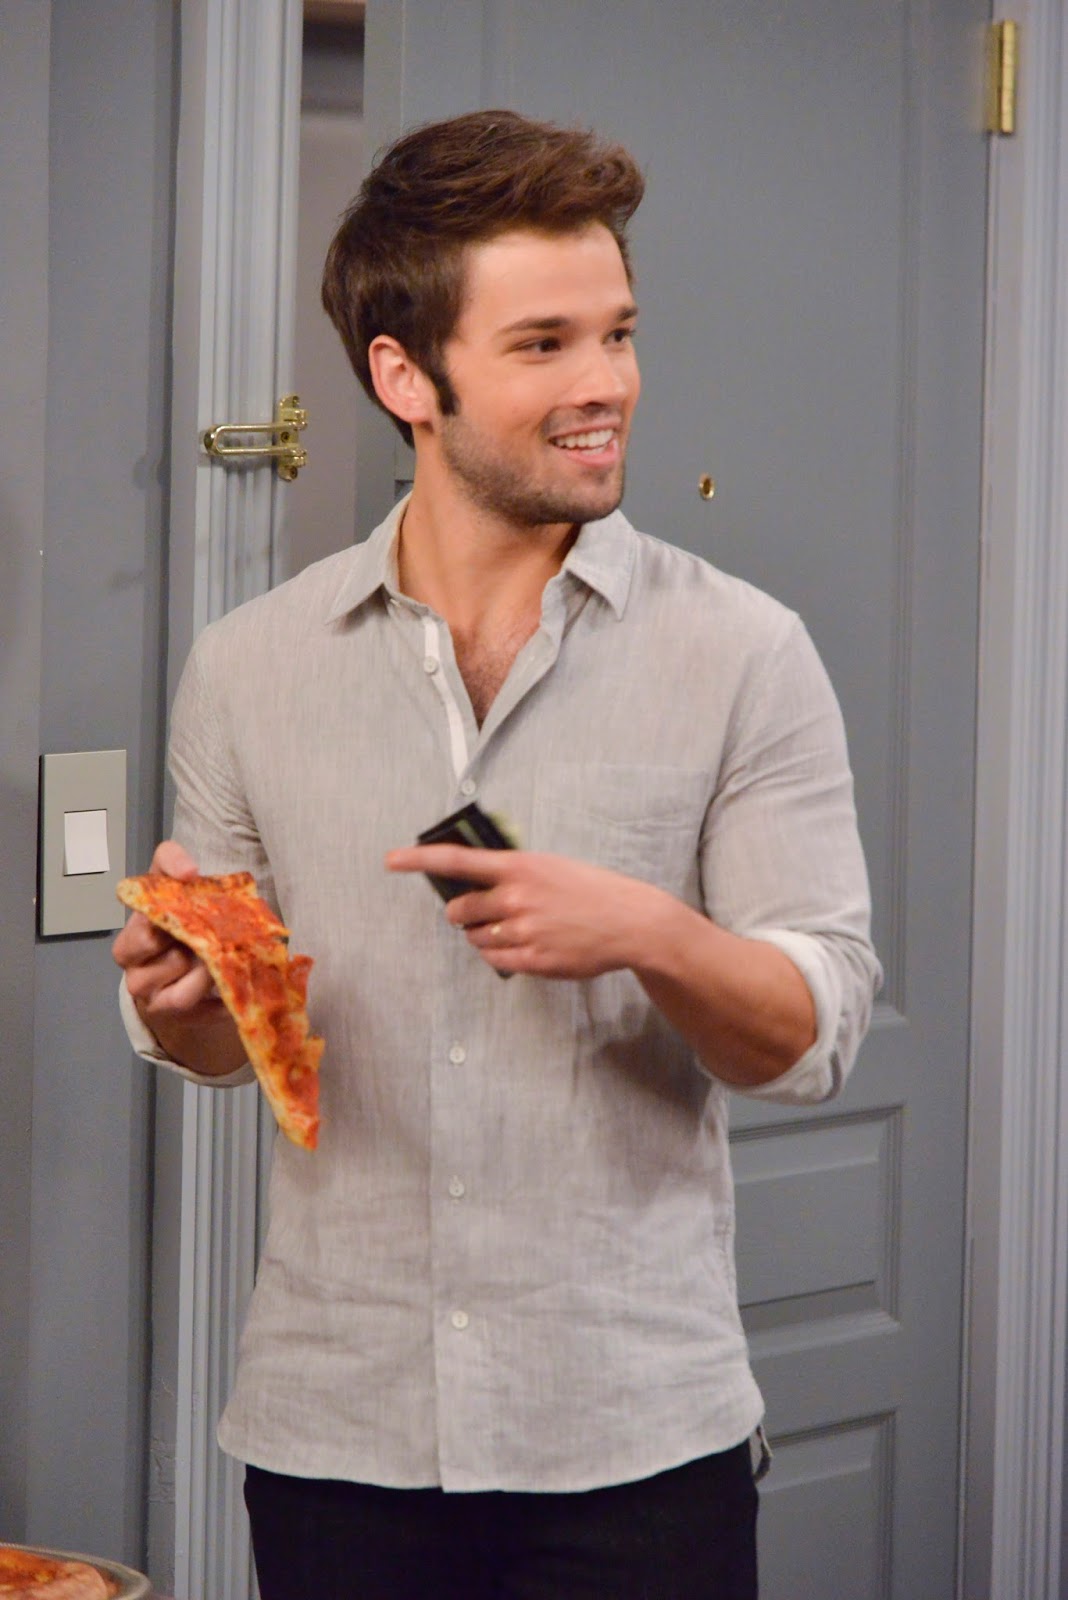 iCarly' Star Nathan Kress Returns to Nick for a 'Game Shakers' Crossover --  Watch a Sneak Peek!